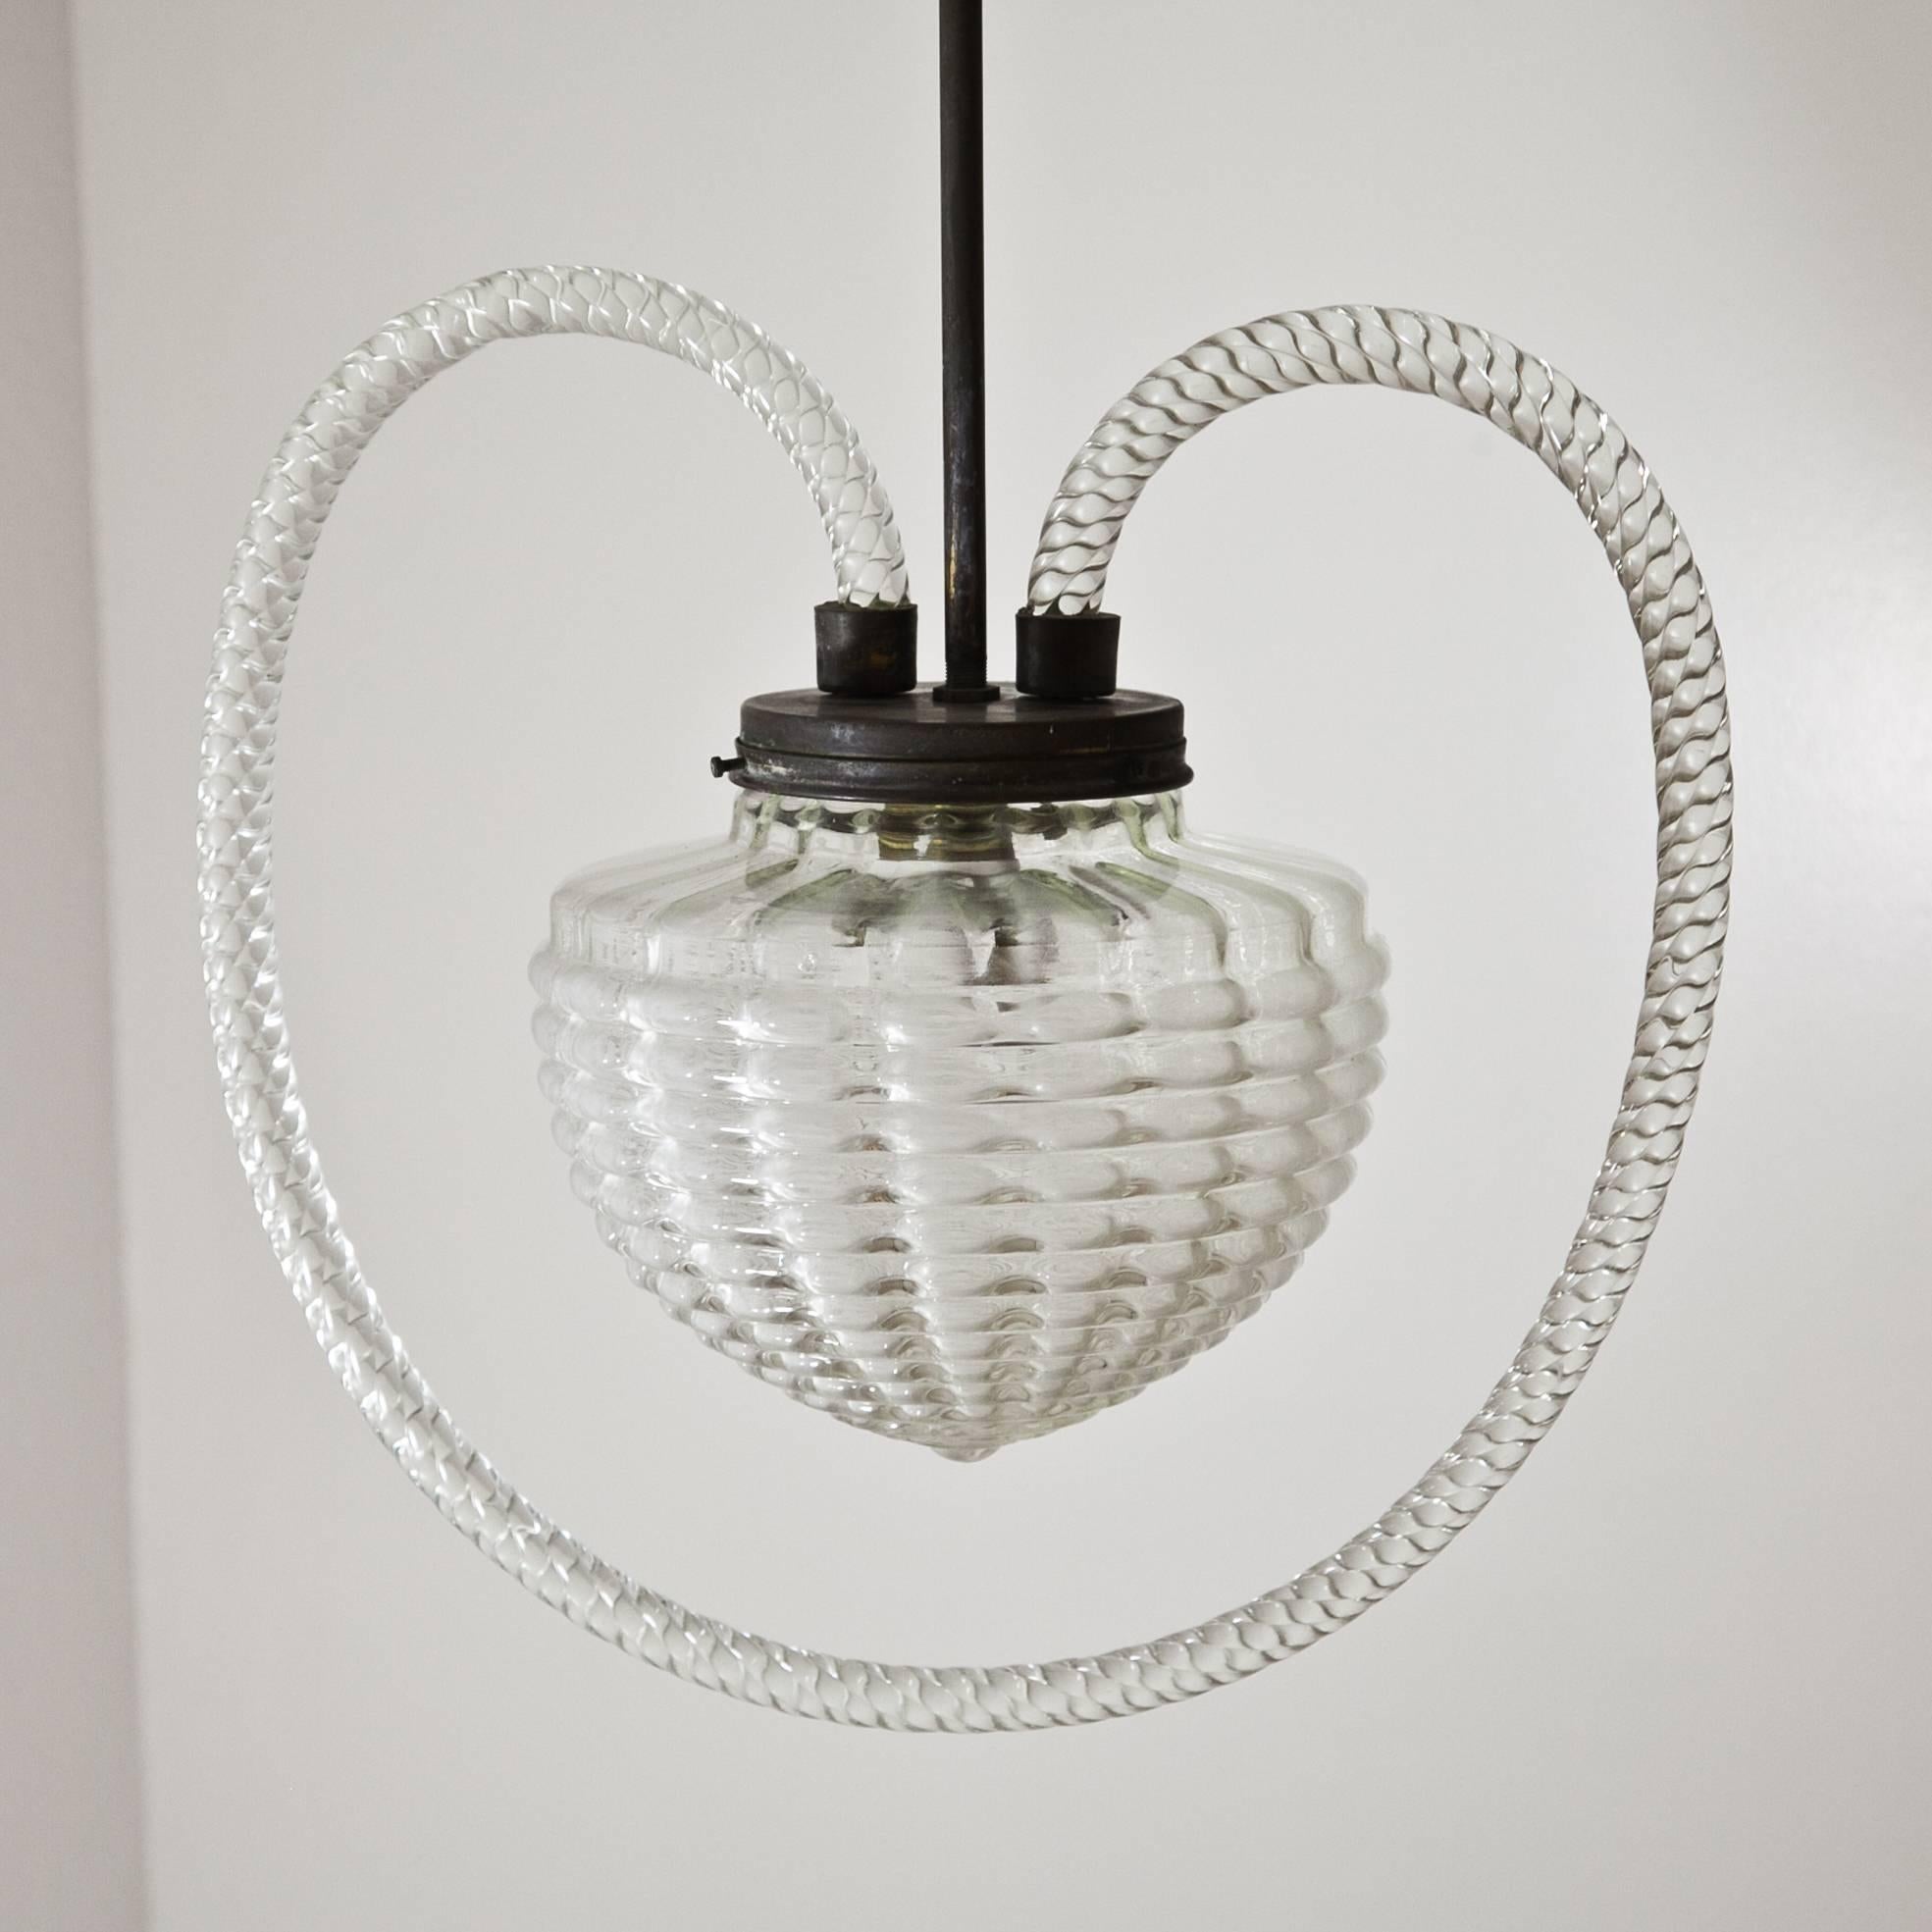 Pendant Lamp, Attributed to Barovier e Toso, Italy, 1940s (Glas)